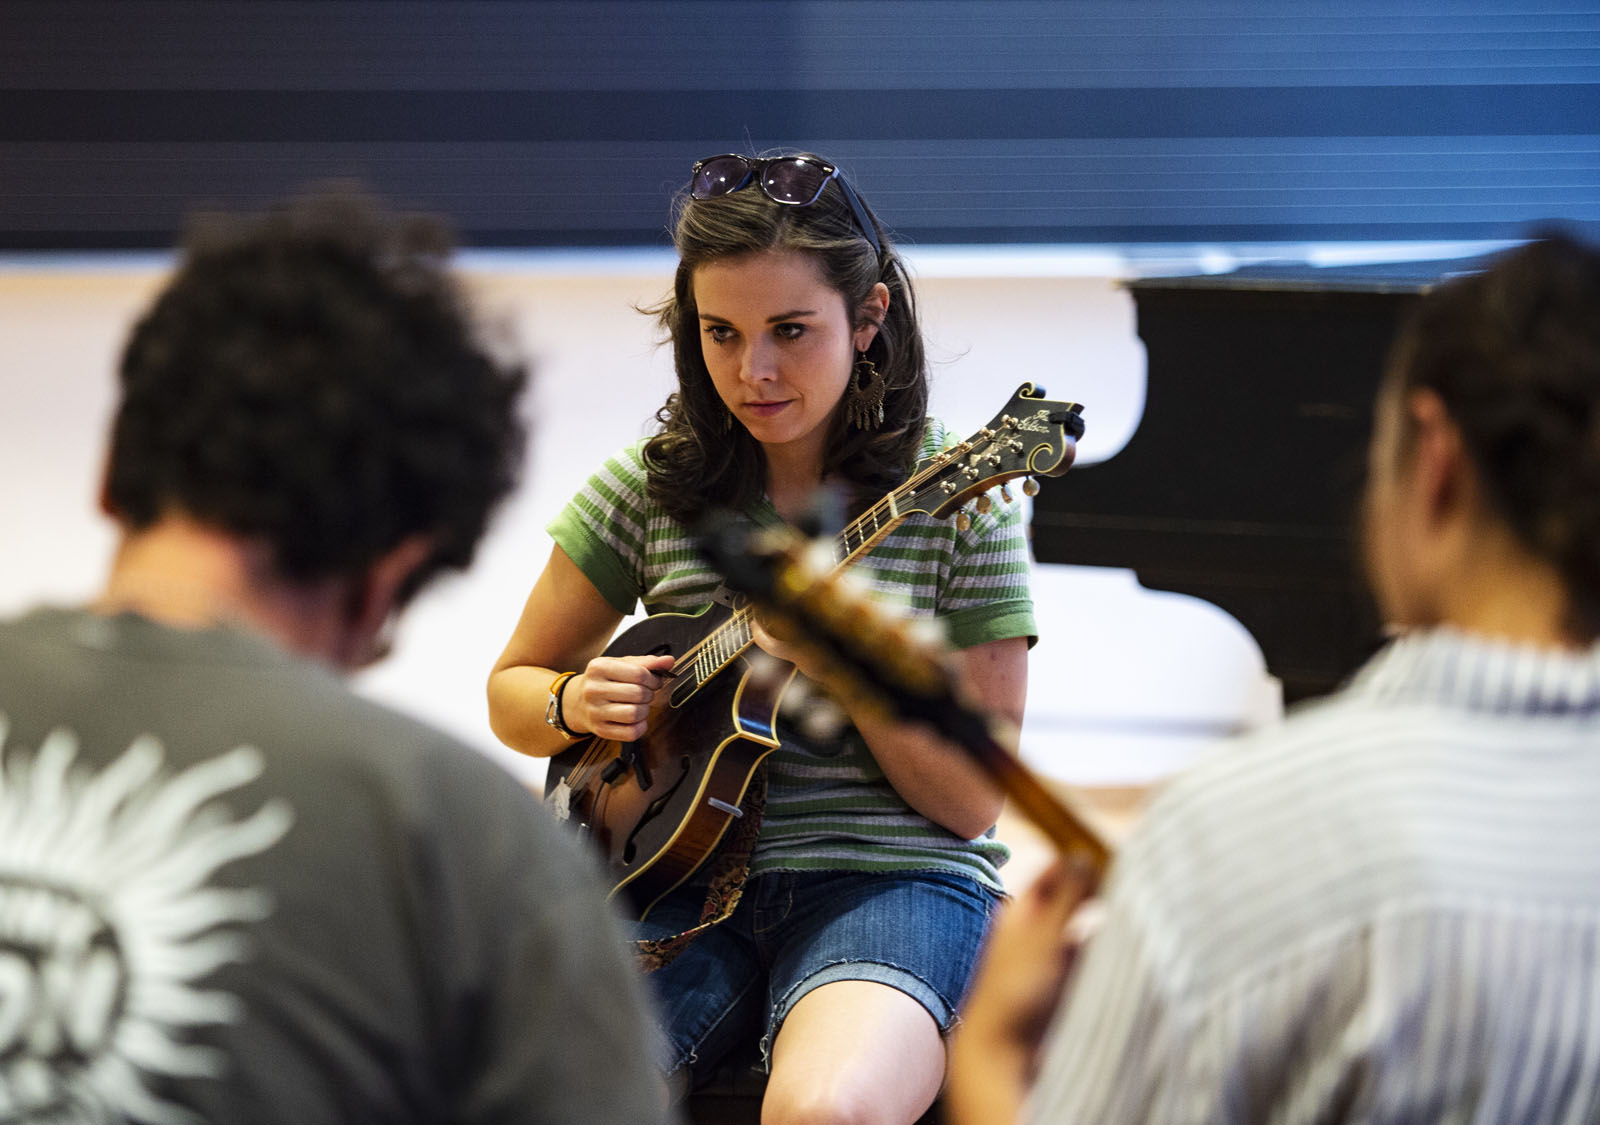 Instructor and two-time Mandolin Player of the Year Sierra Hull leads the mandolin class through a song during the Bluegrass Workshop in Packard Hall on June 26, 2018.